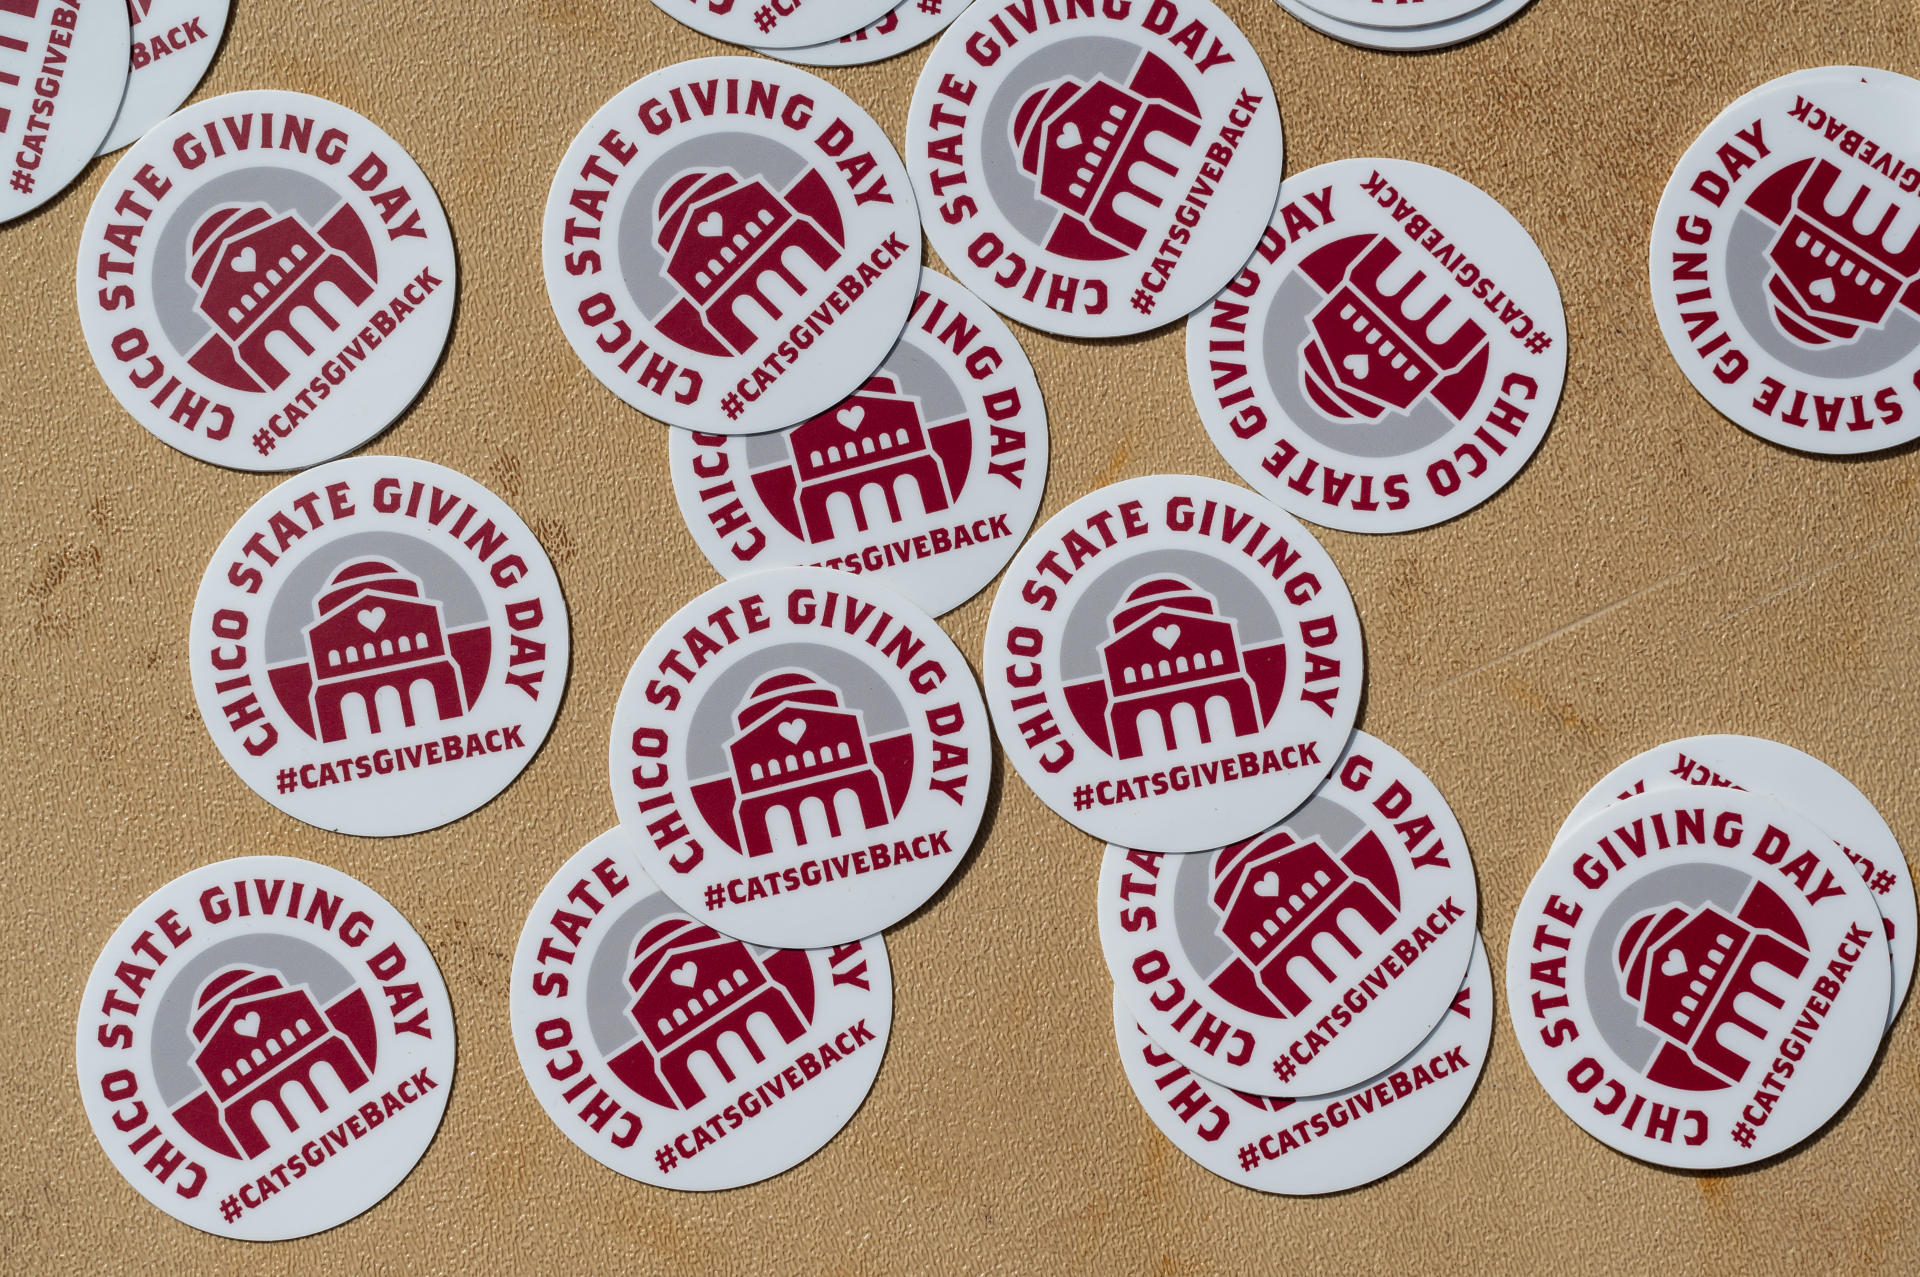 Round stickers that say Chico State Giving Day are spread out on a table